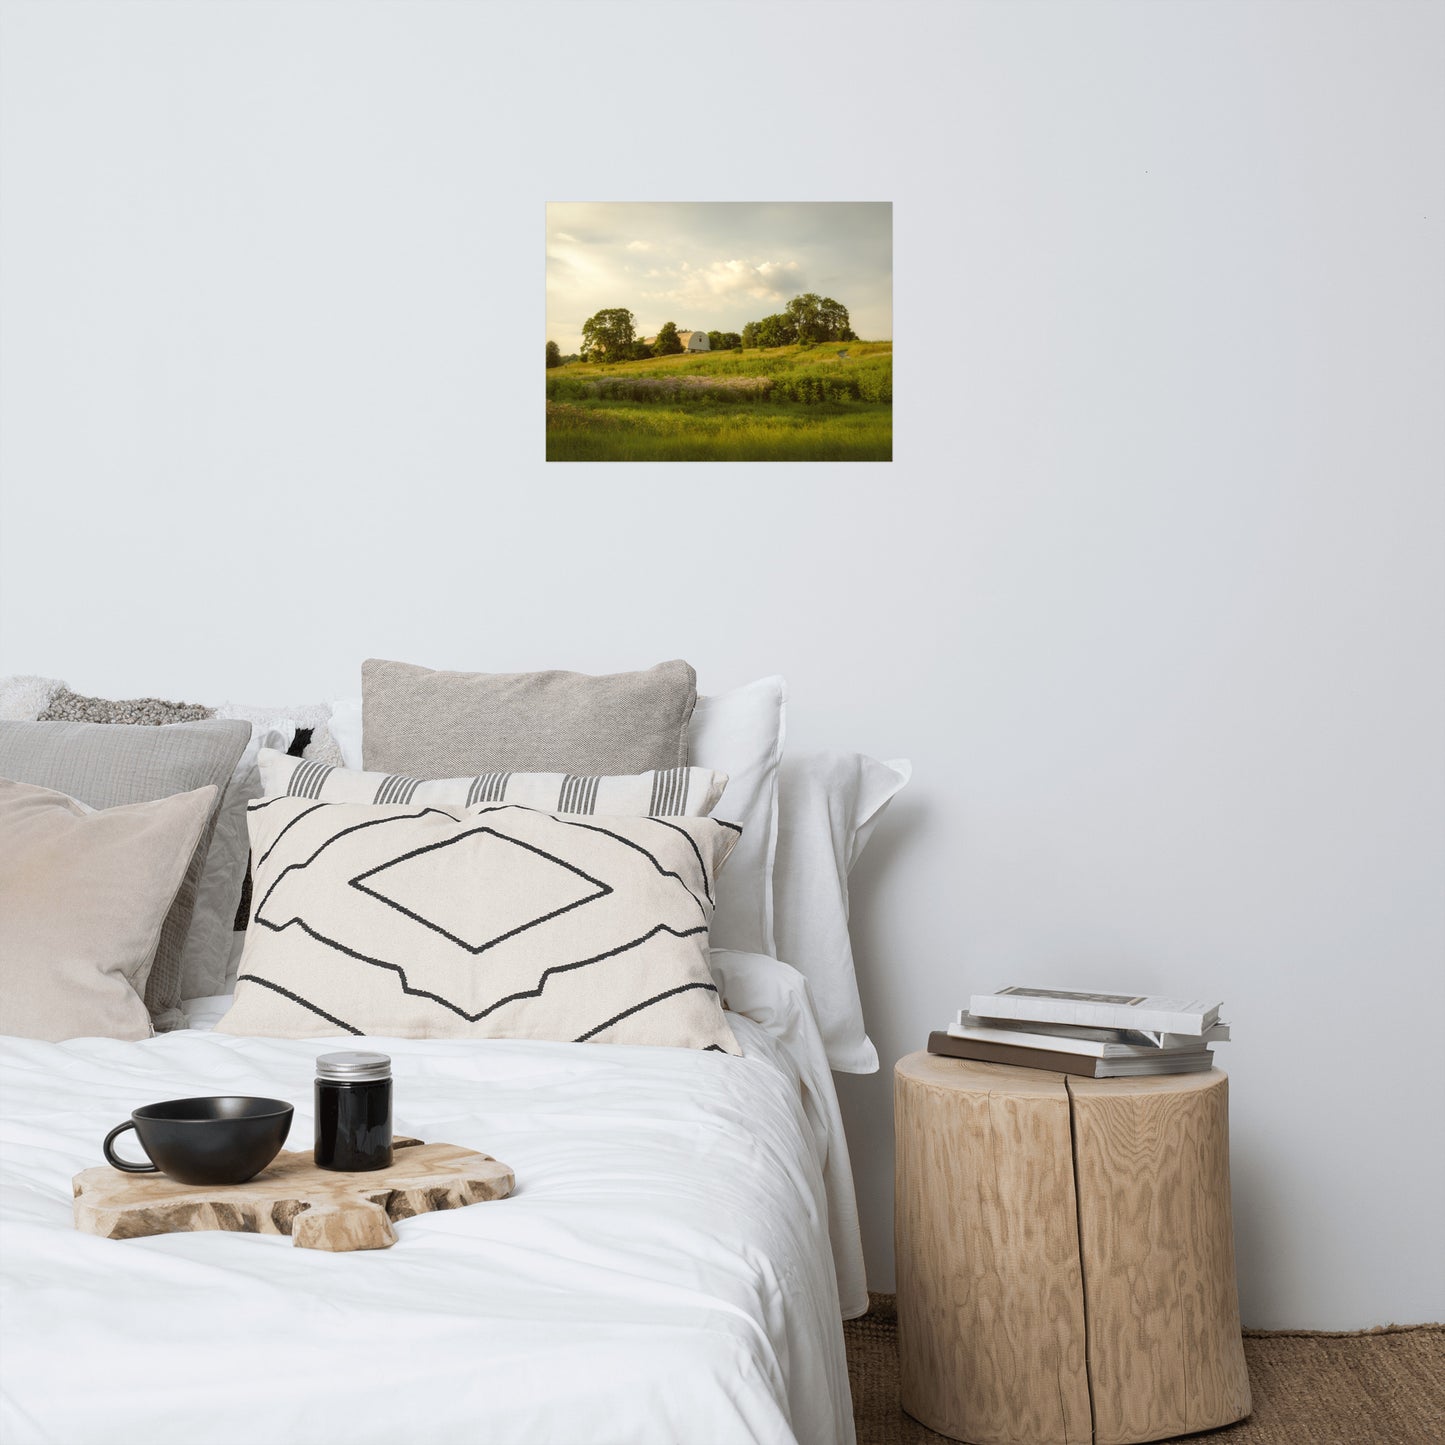 Remnant of Better Days Landscape Photo Loose Wall Art Prints